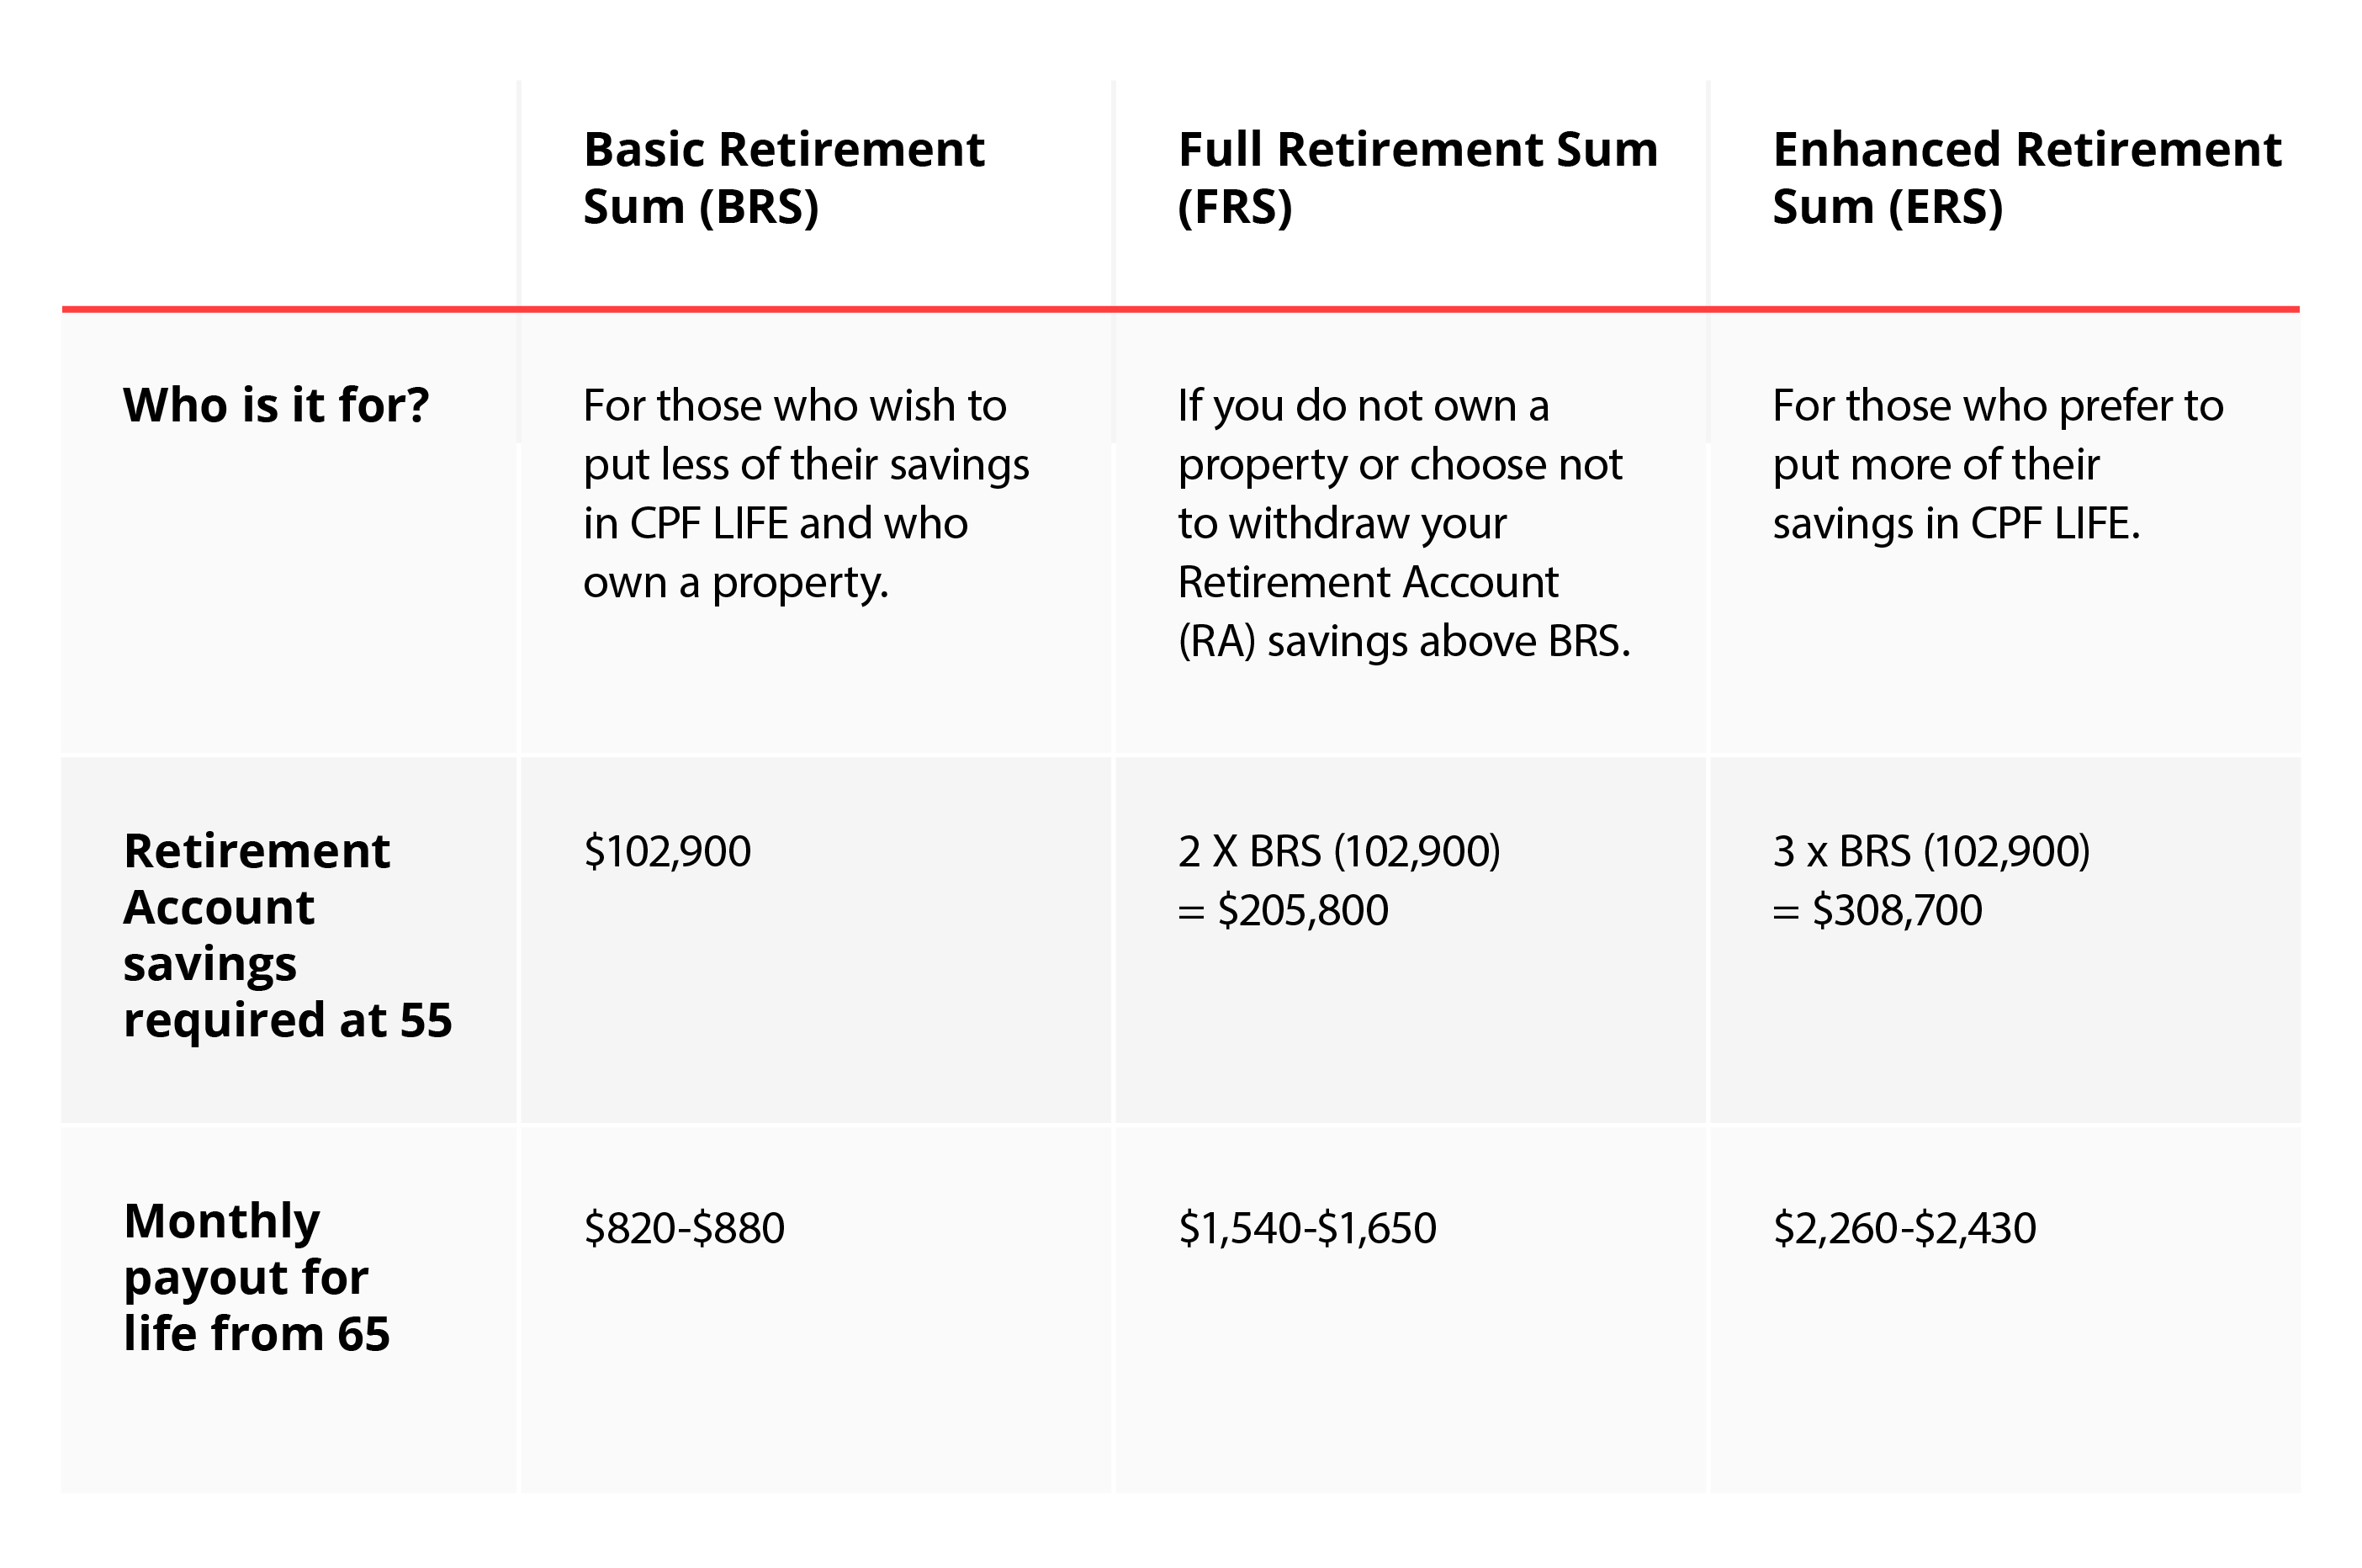 CPF LIFE or Retirement Sum Scheme for your retirement?